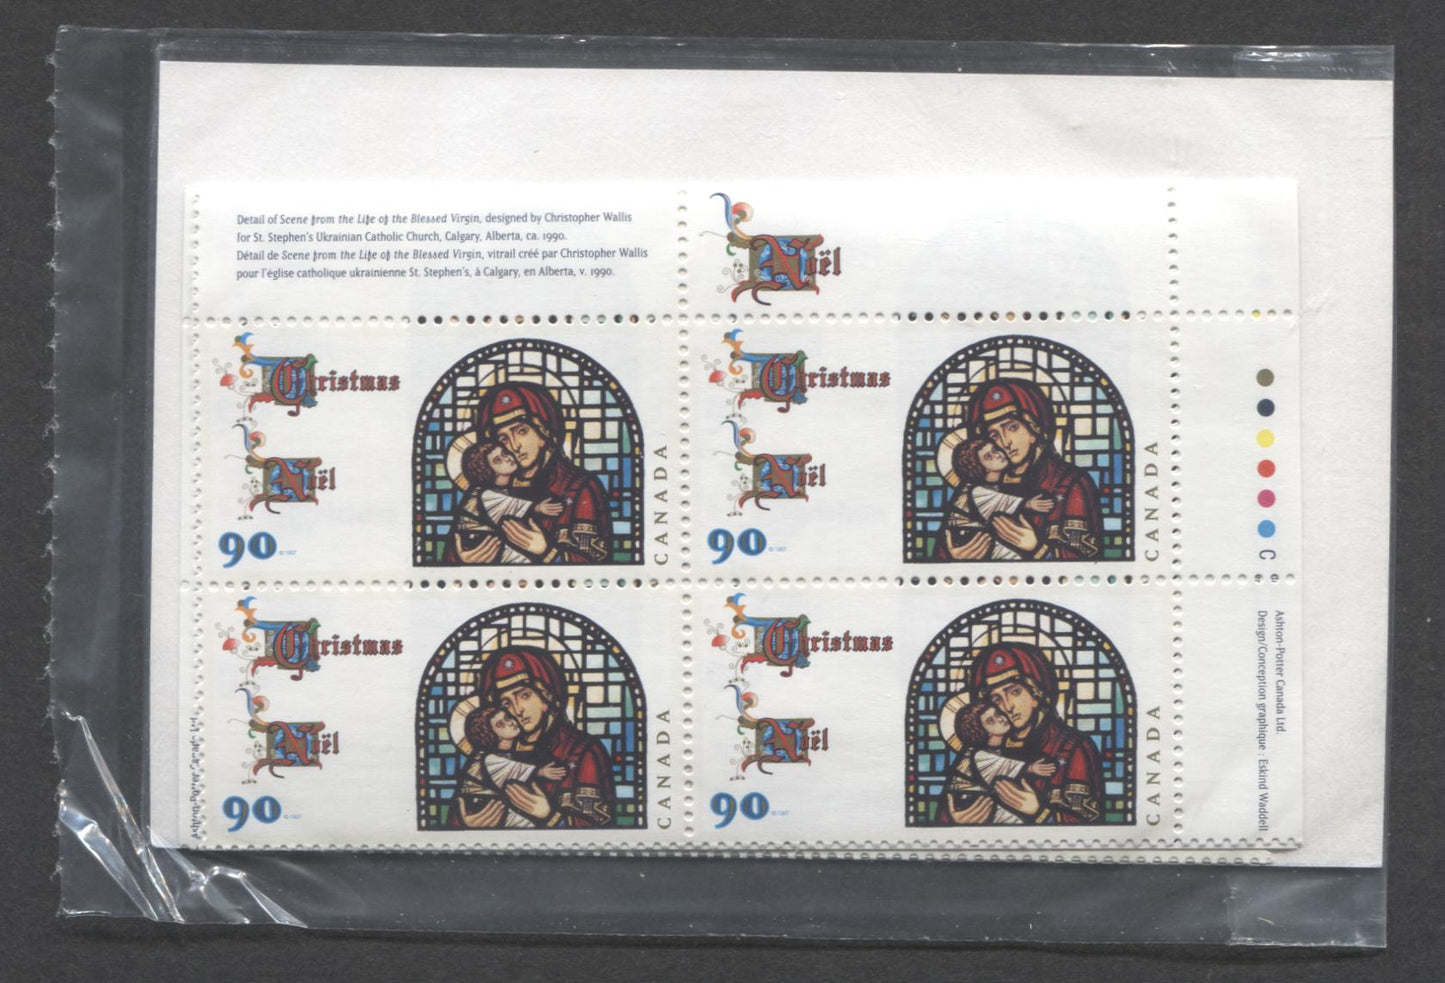 Lot 322 Canada #1671 90c Multicolored Scene From The Life Of The Blessed Virgin 1997 Christmas, Canada Post Sealed Pack of Inscription Blocks on Coated Paper With HB Type 6A Insert Card, VFNH, Unitrade Cat. $36